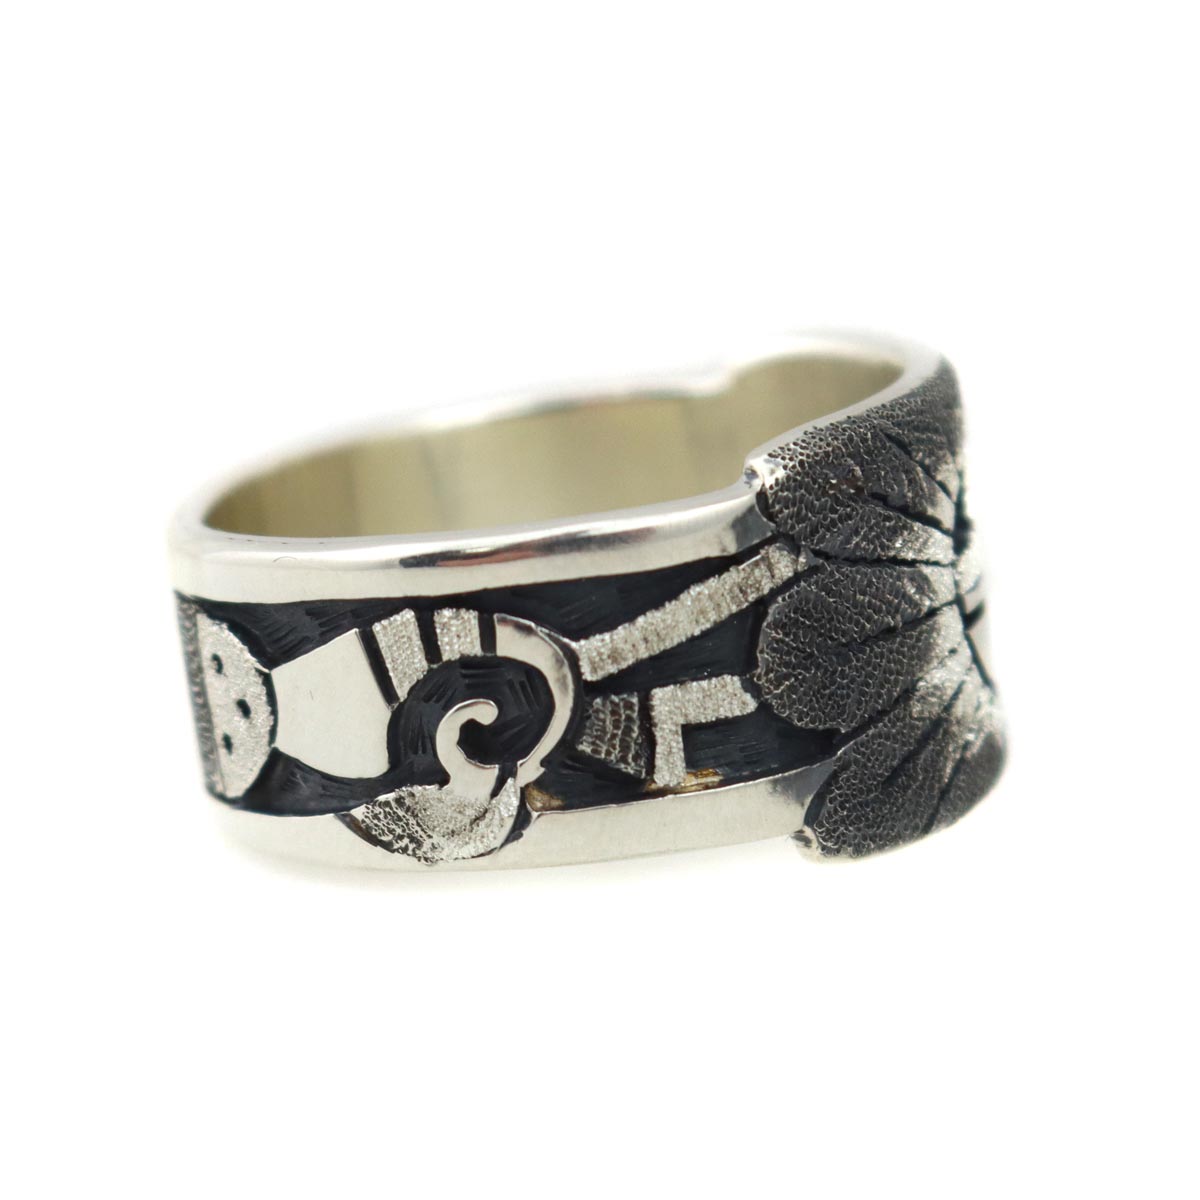 Ronald Wadsworth - Hopi Contemporary Sterling Silver Overlay Ring with Sunface Kachina Design, size 10.75 (J14774) 1